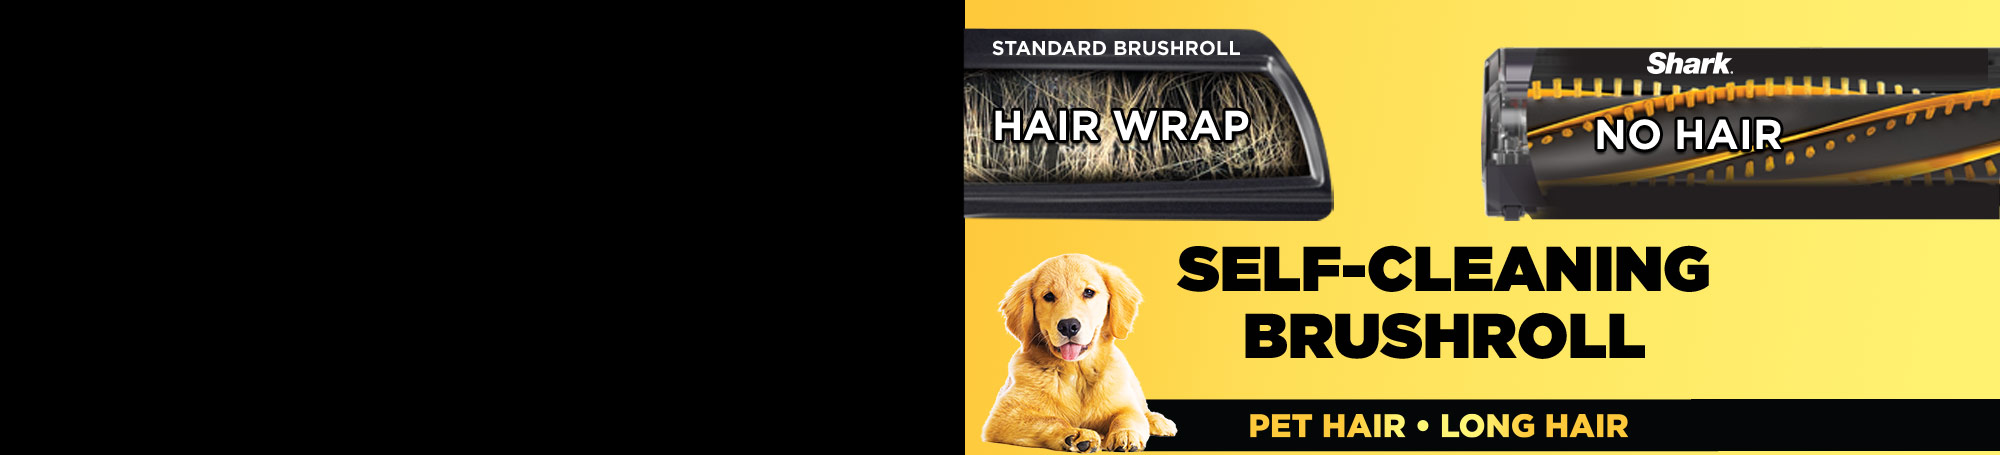 Two brushrolls, one standard with hair wrapped around it, Shark model with no hair. Works on pet hair and long.